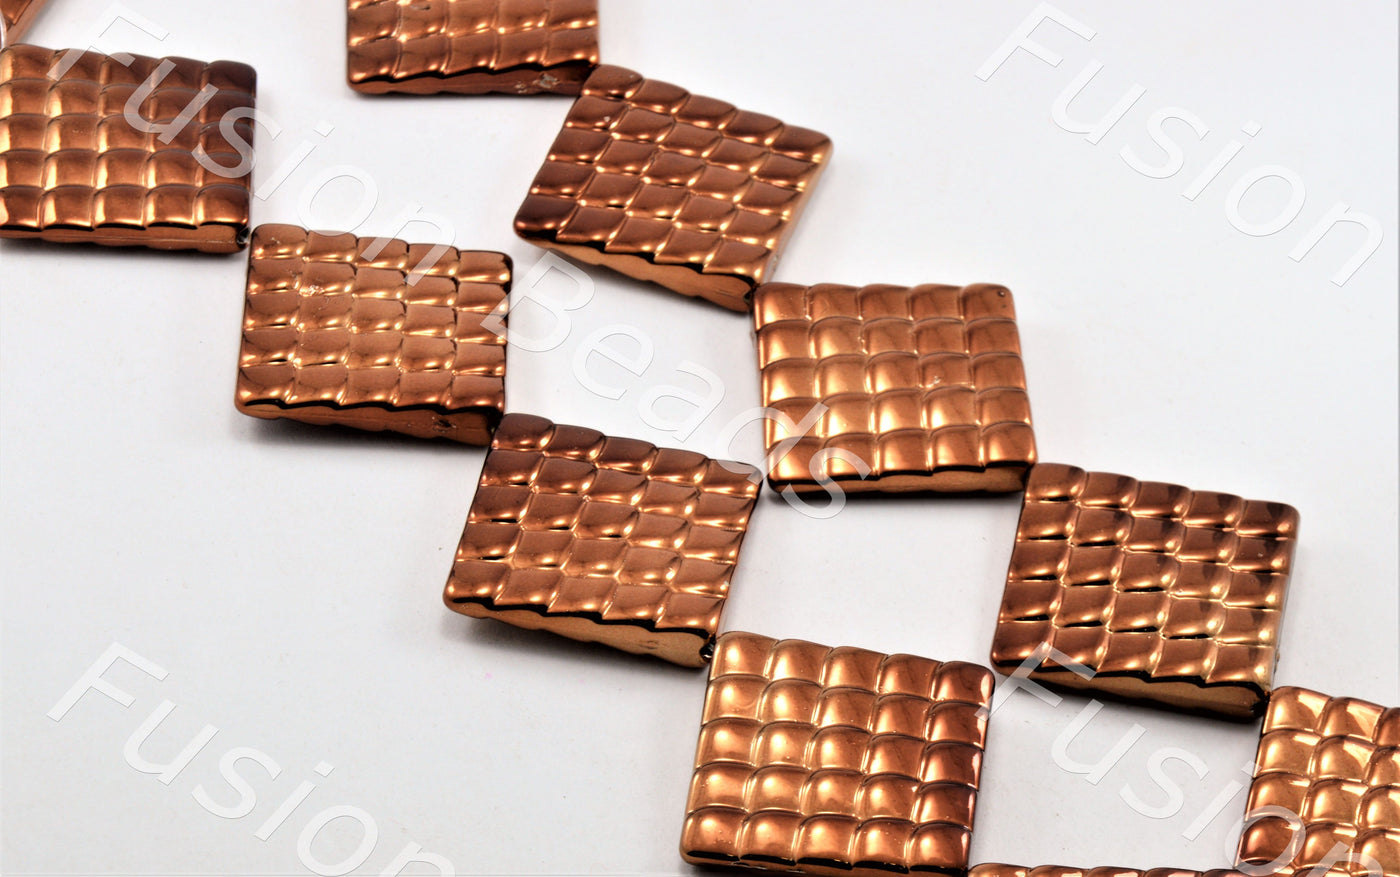 Copper Metallic Grooved Square Shaped Plastic Stone (11469585491)